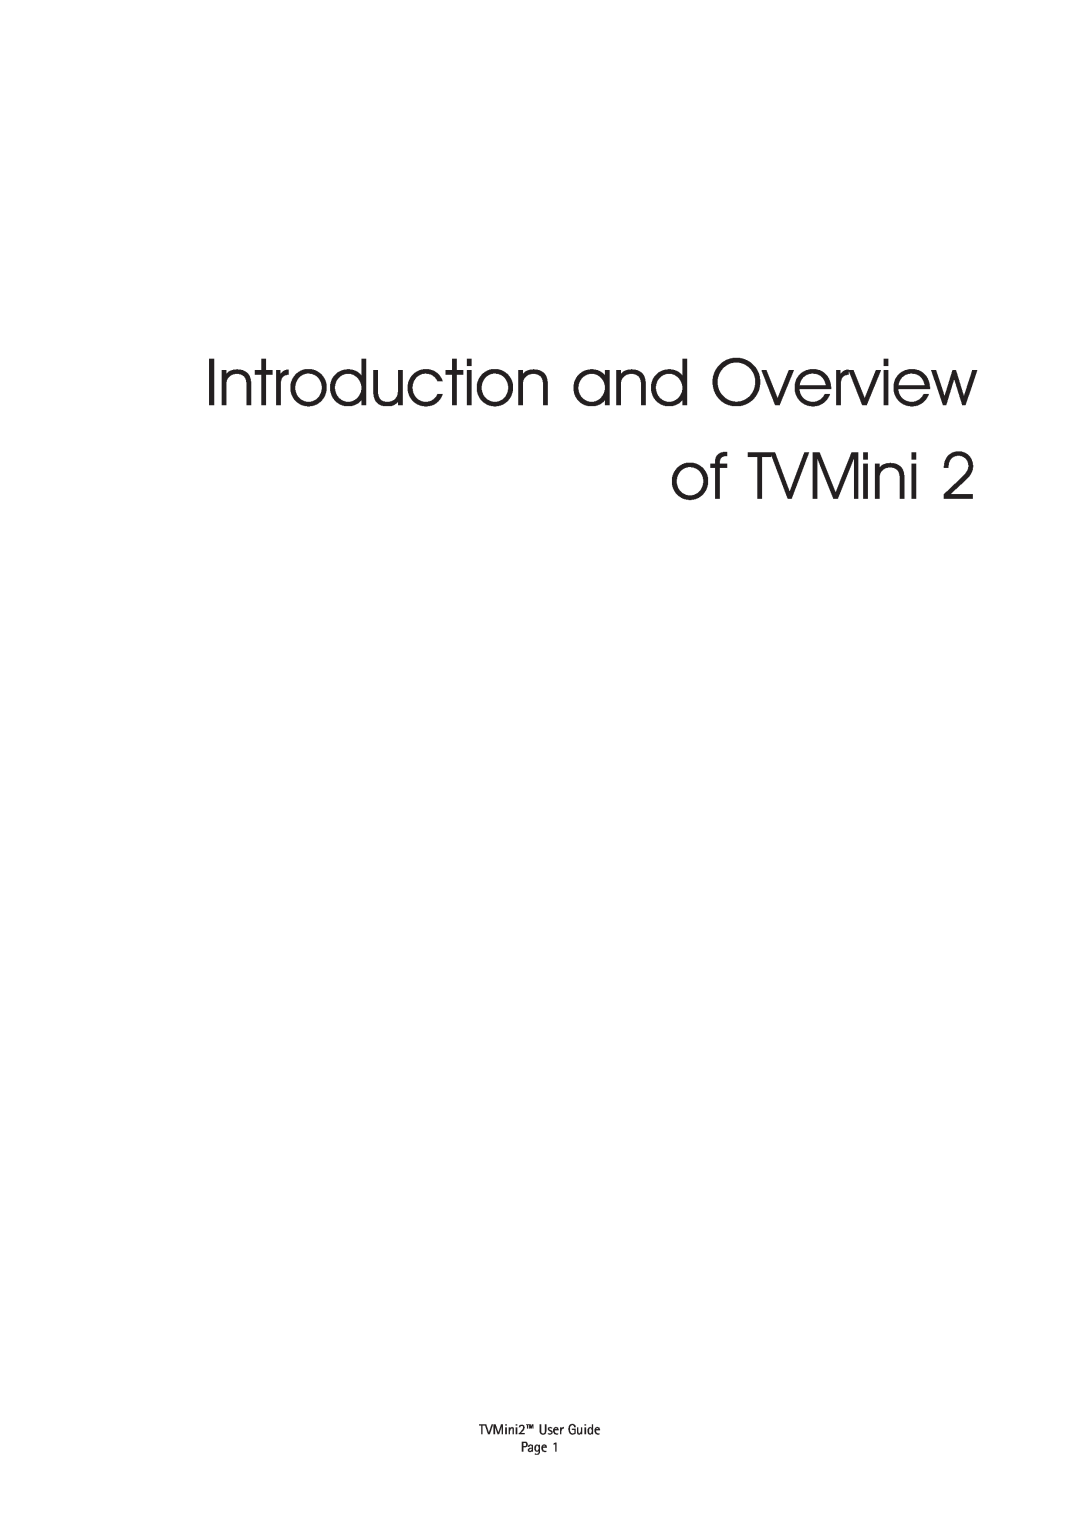 Miglia Technology TVMini 2 manual Introduction and Overview, of TVMini, TVMini2 User Guide Page 